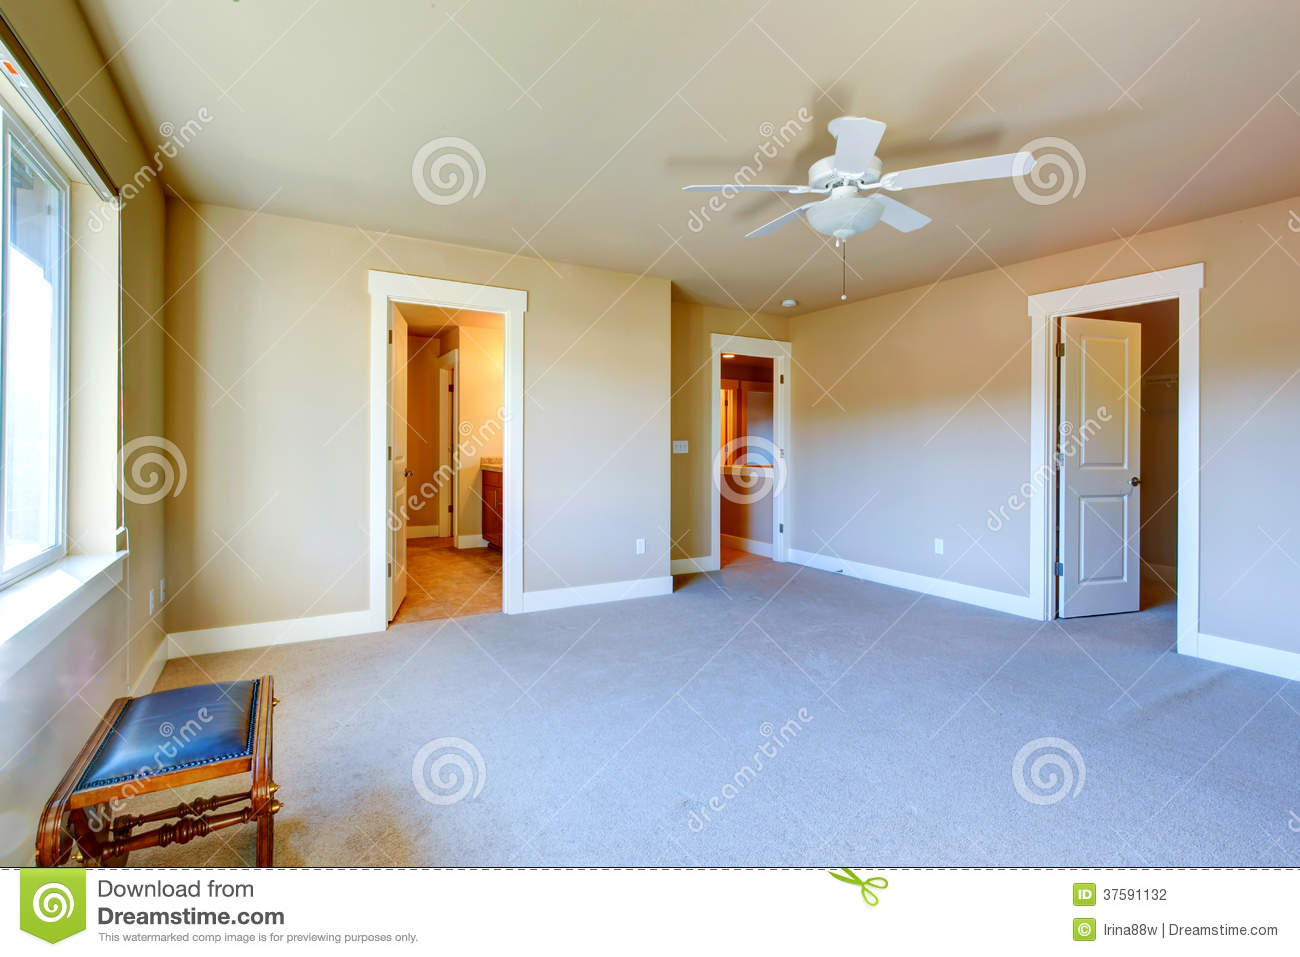 Room With Carpet Floor Ceiling Fan Has Walk In Closet And Bathroom